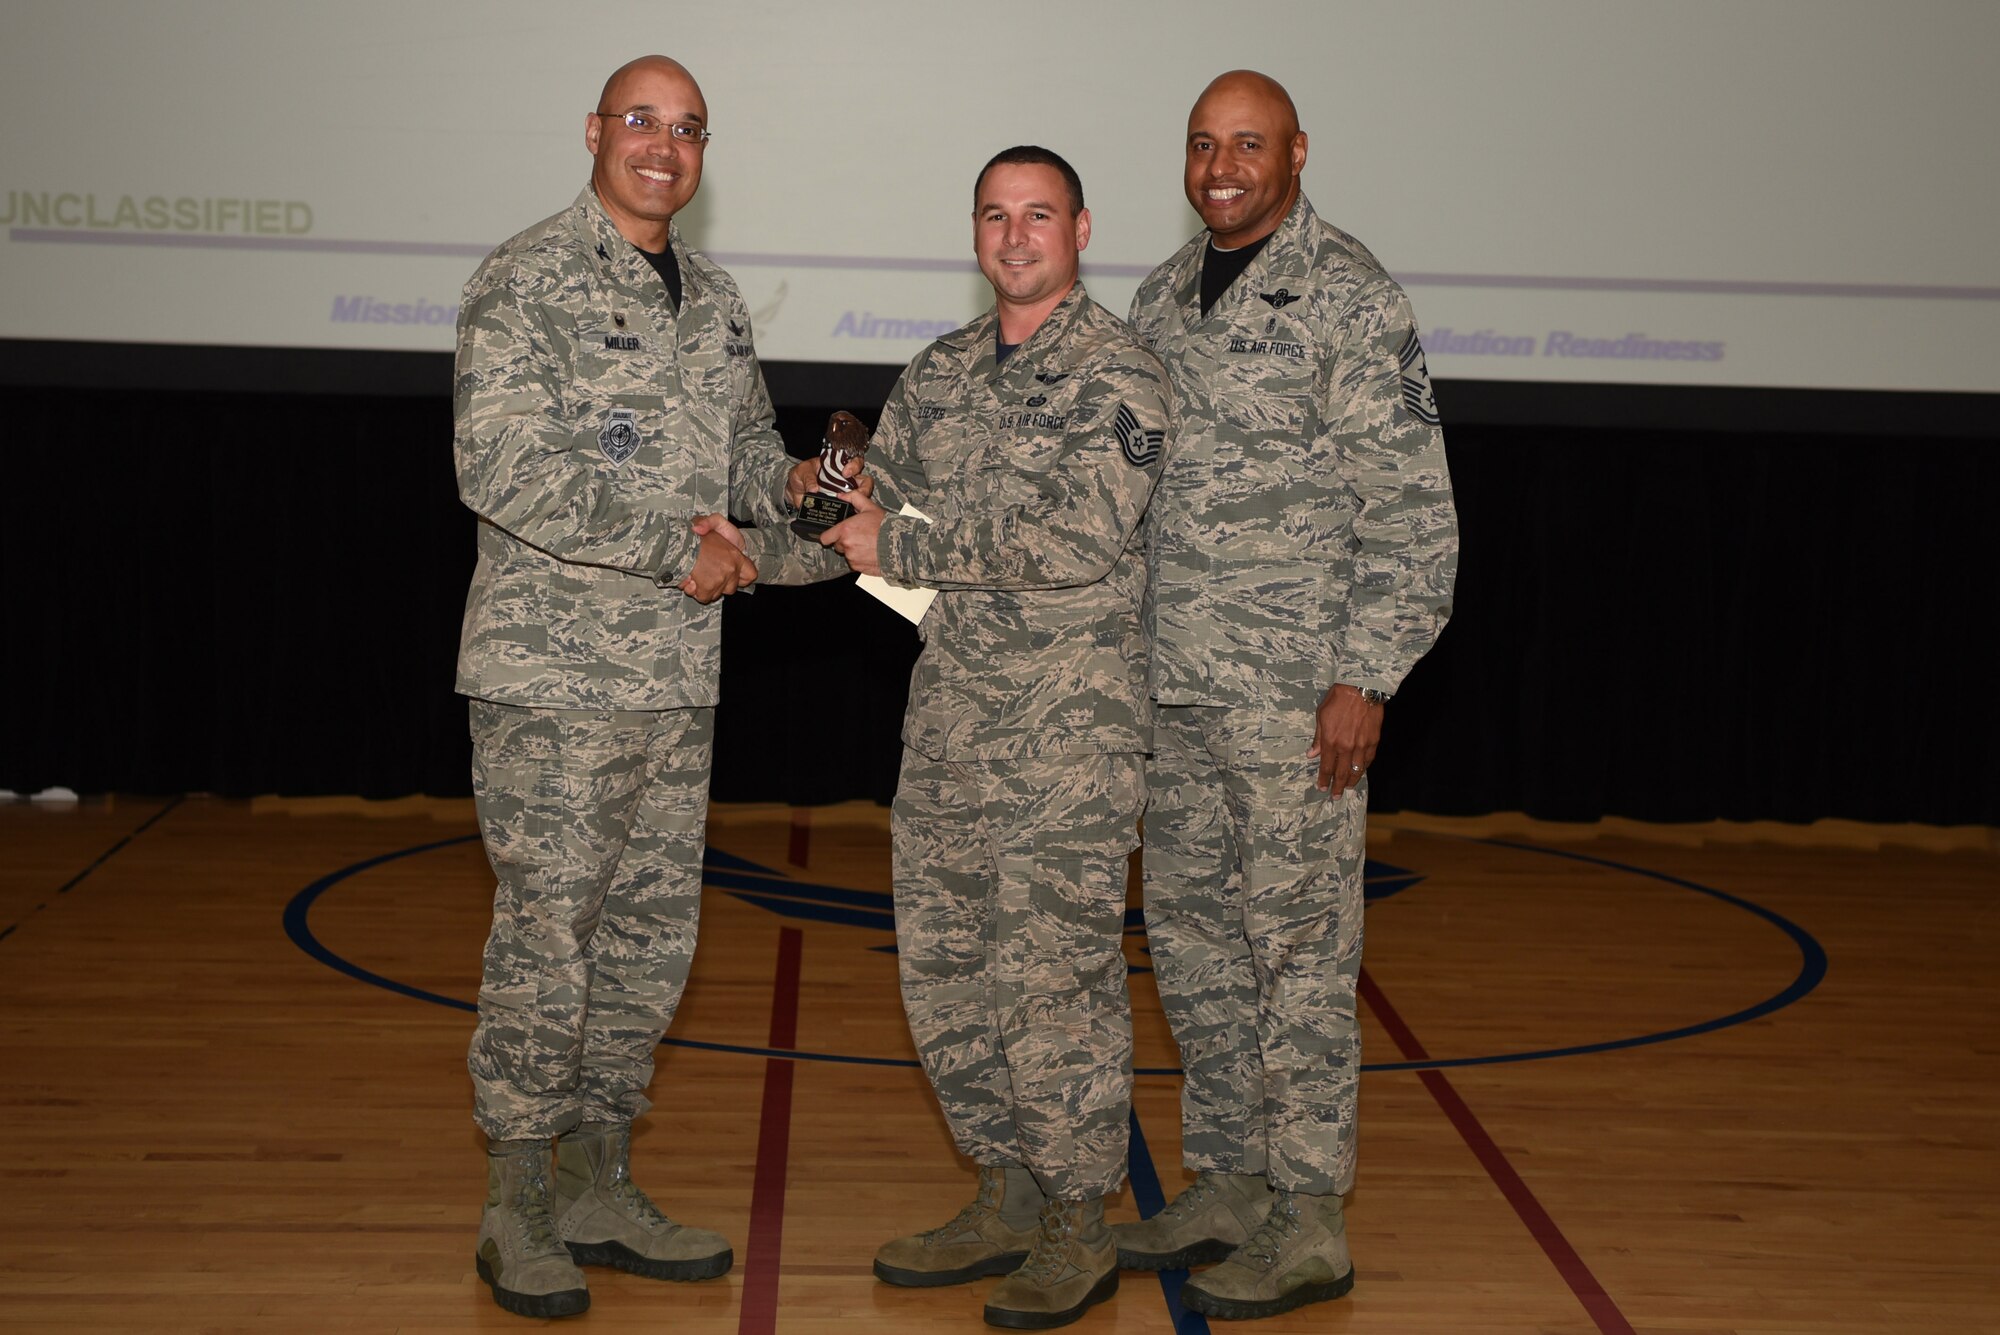 Paul Sleeper, 460th Operations Group, receives the Noncommissioned Officer of the Quarter Award May 19, 2017, on Buckley Air Force Base, Colo.  Awards were given to the Team Buckley members who showed dedication, hard work and exceeded their supervisor’s expectations. (U.S. Air Force photo by Airman 1st Class Holden S. Faul/ released)